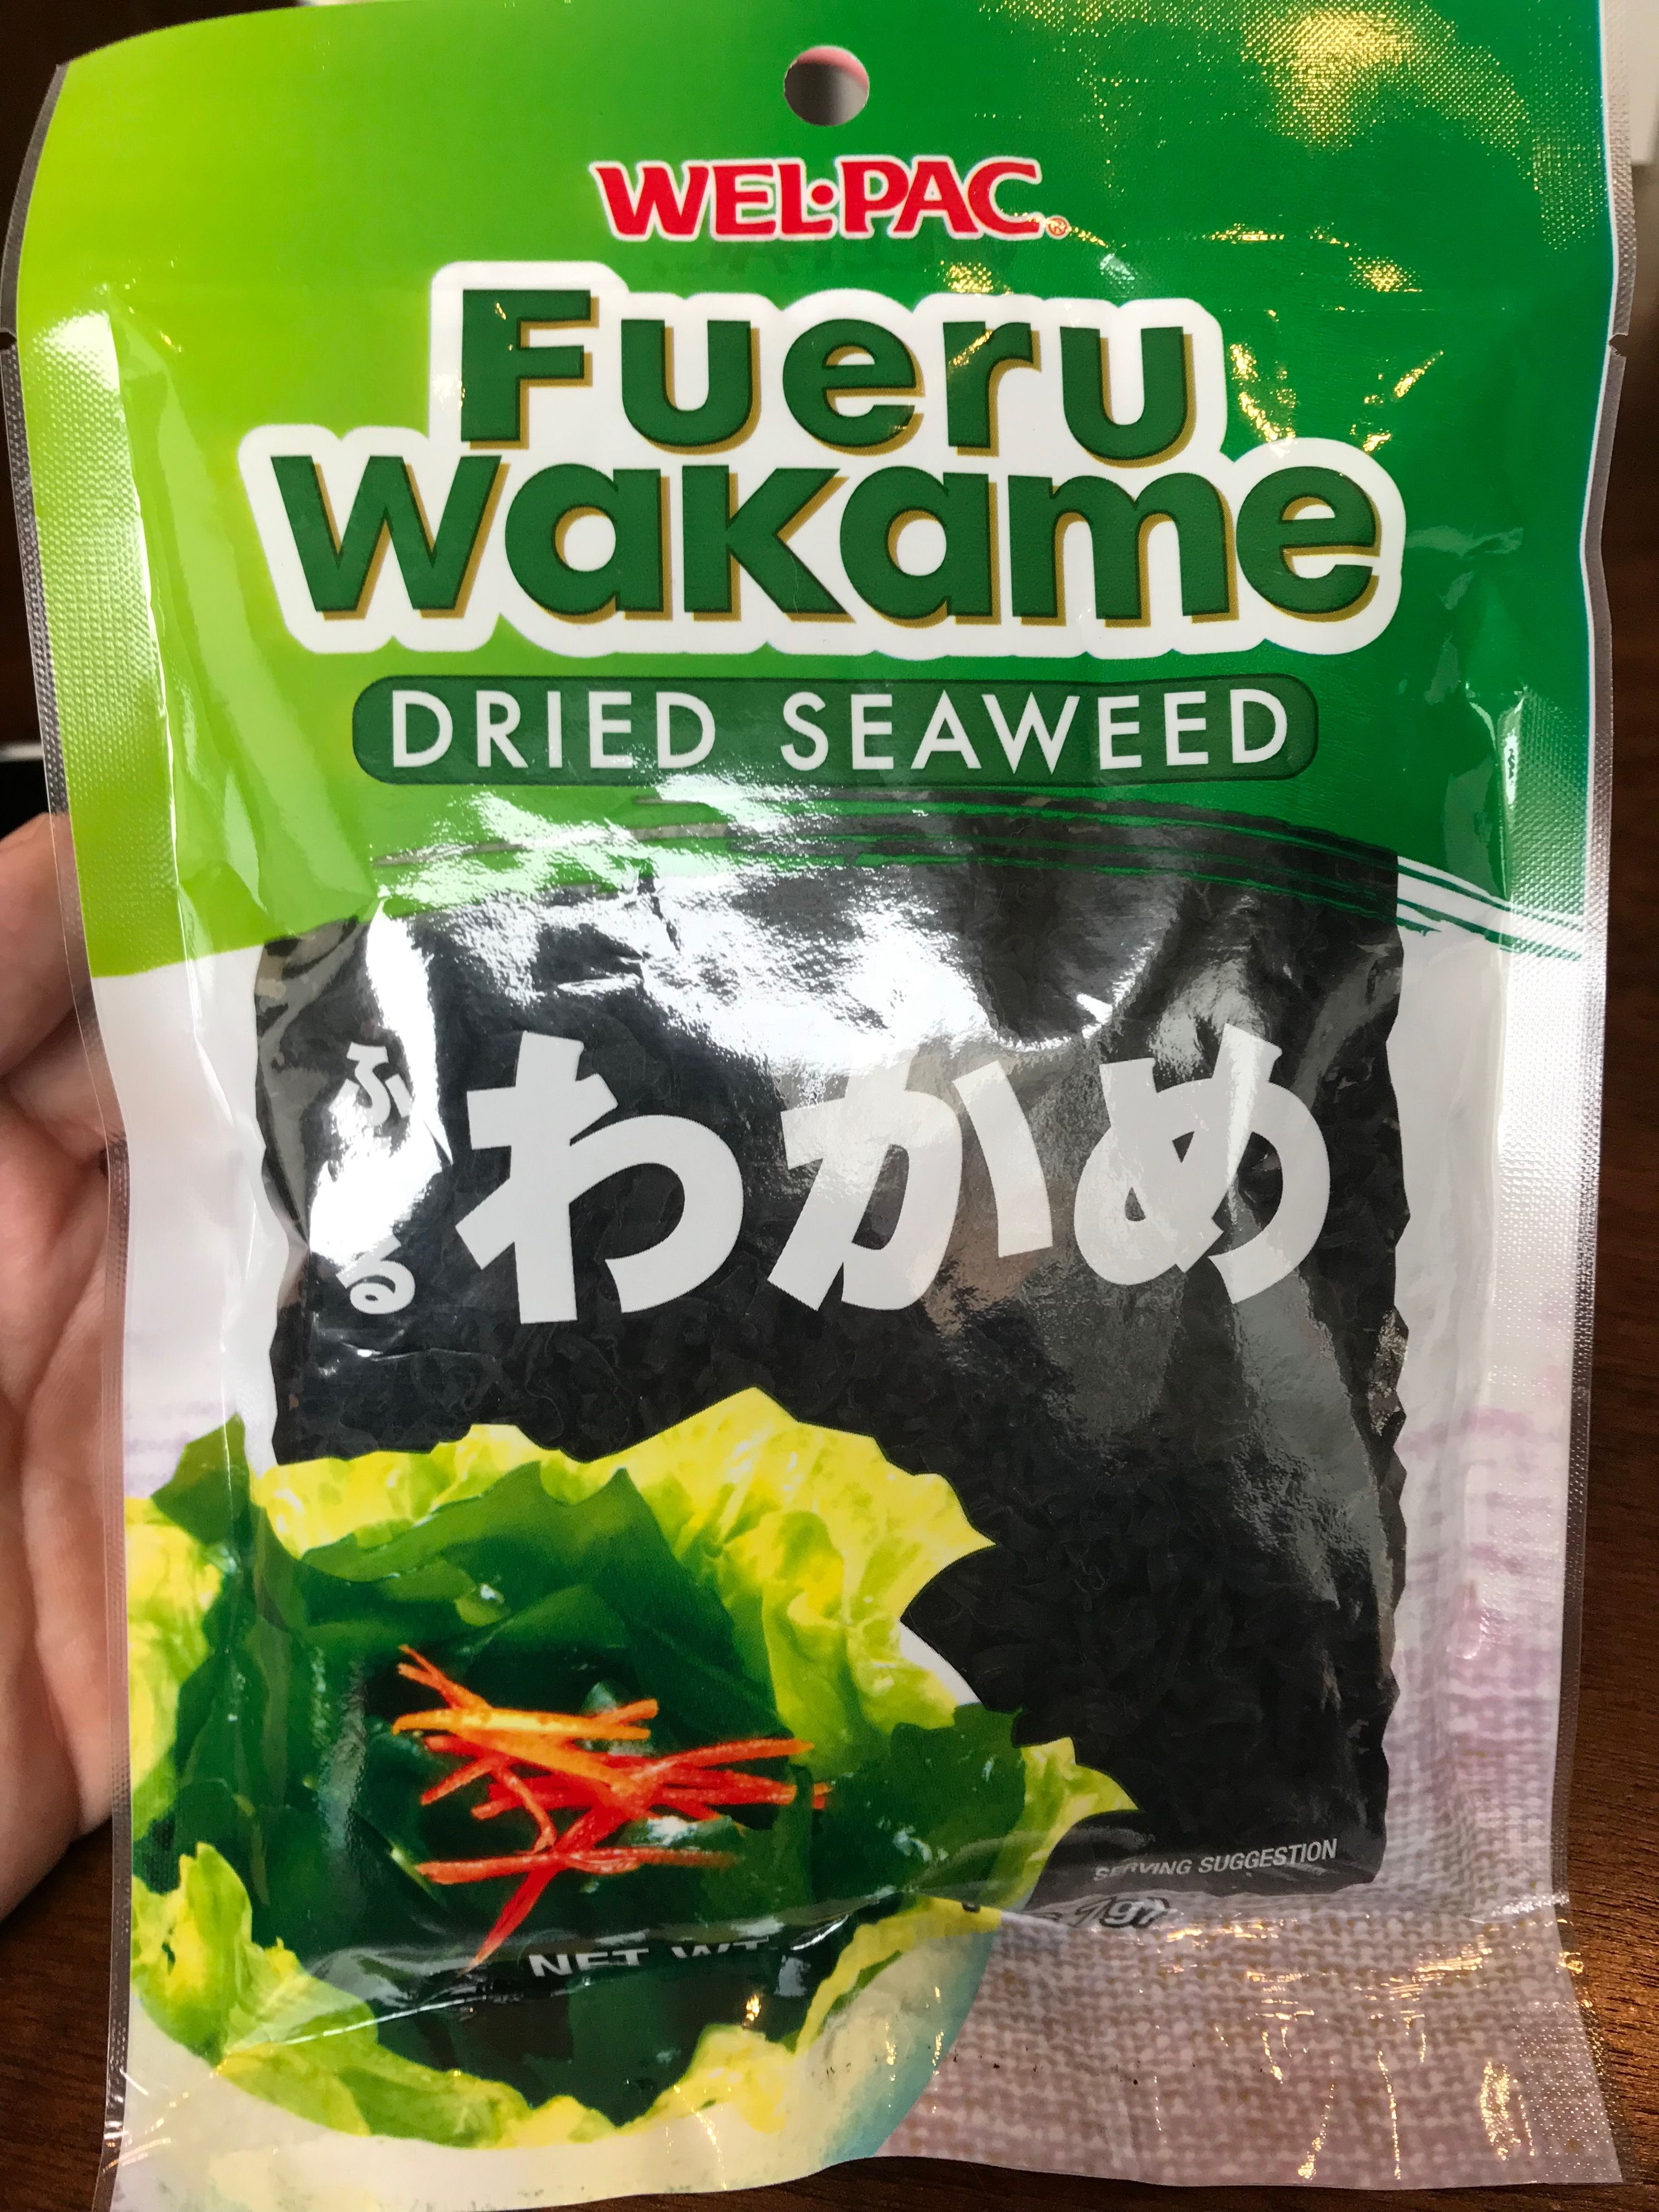 wakame_front.jpg